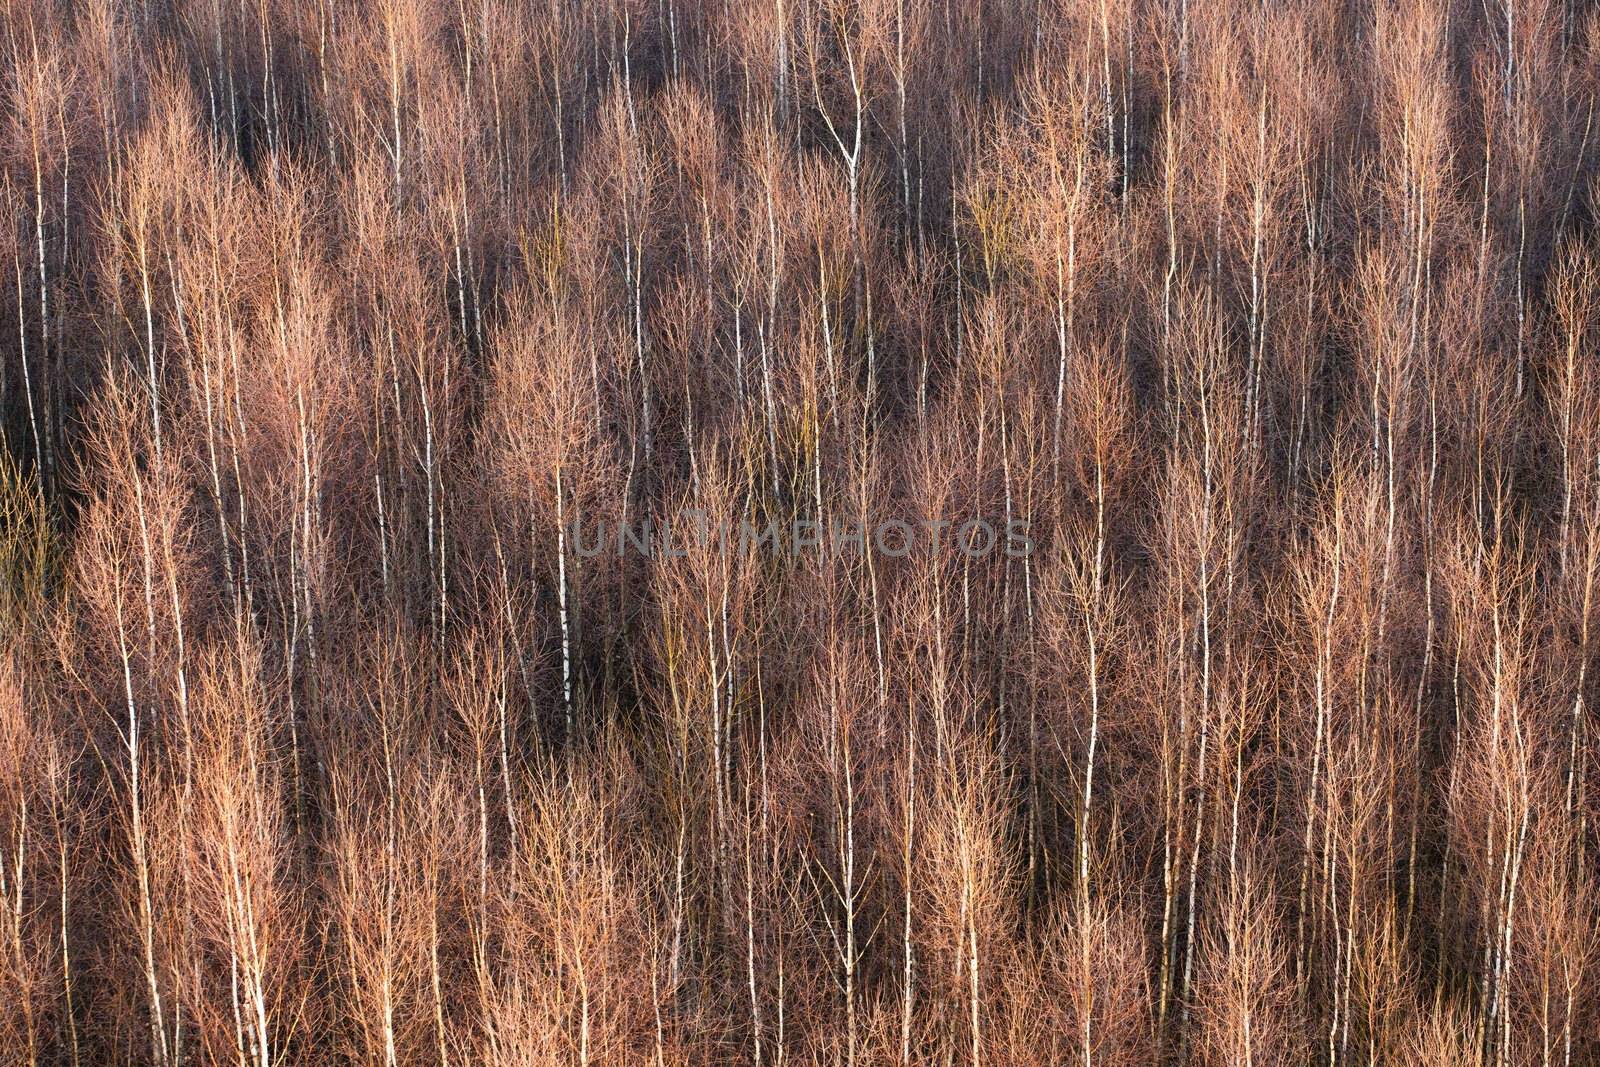 view from the top of a birch forest